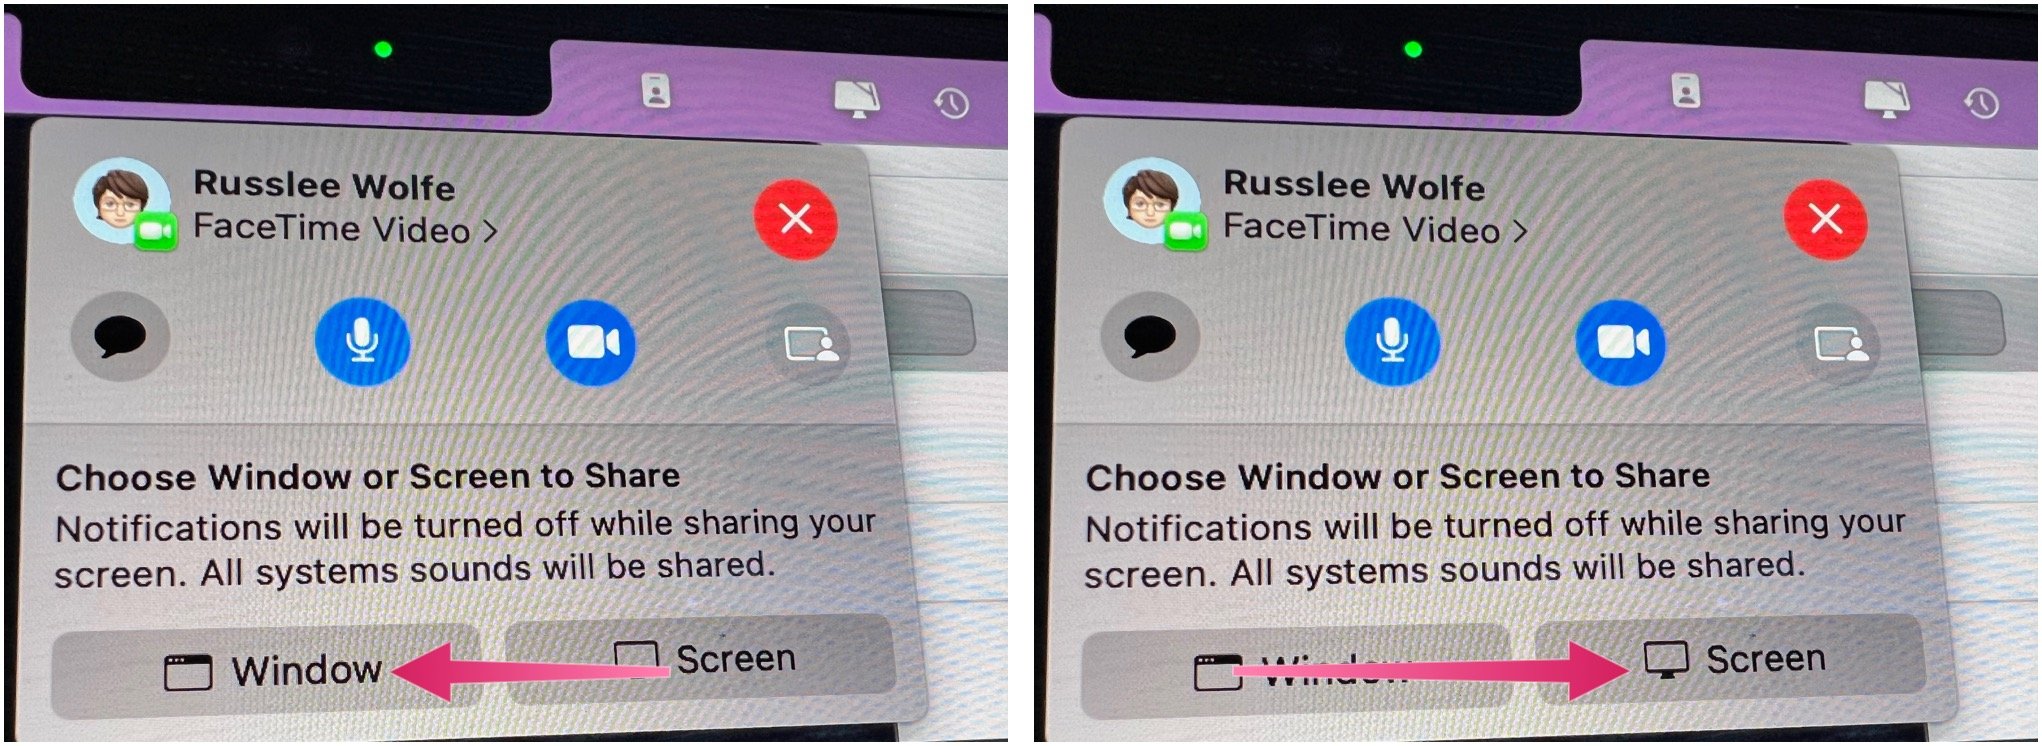 To share your screen using SharePlay in FaceTime, click the FaceTime button, then choose the Screen Share button. Select Window or Screen. 